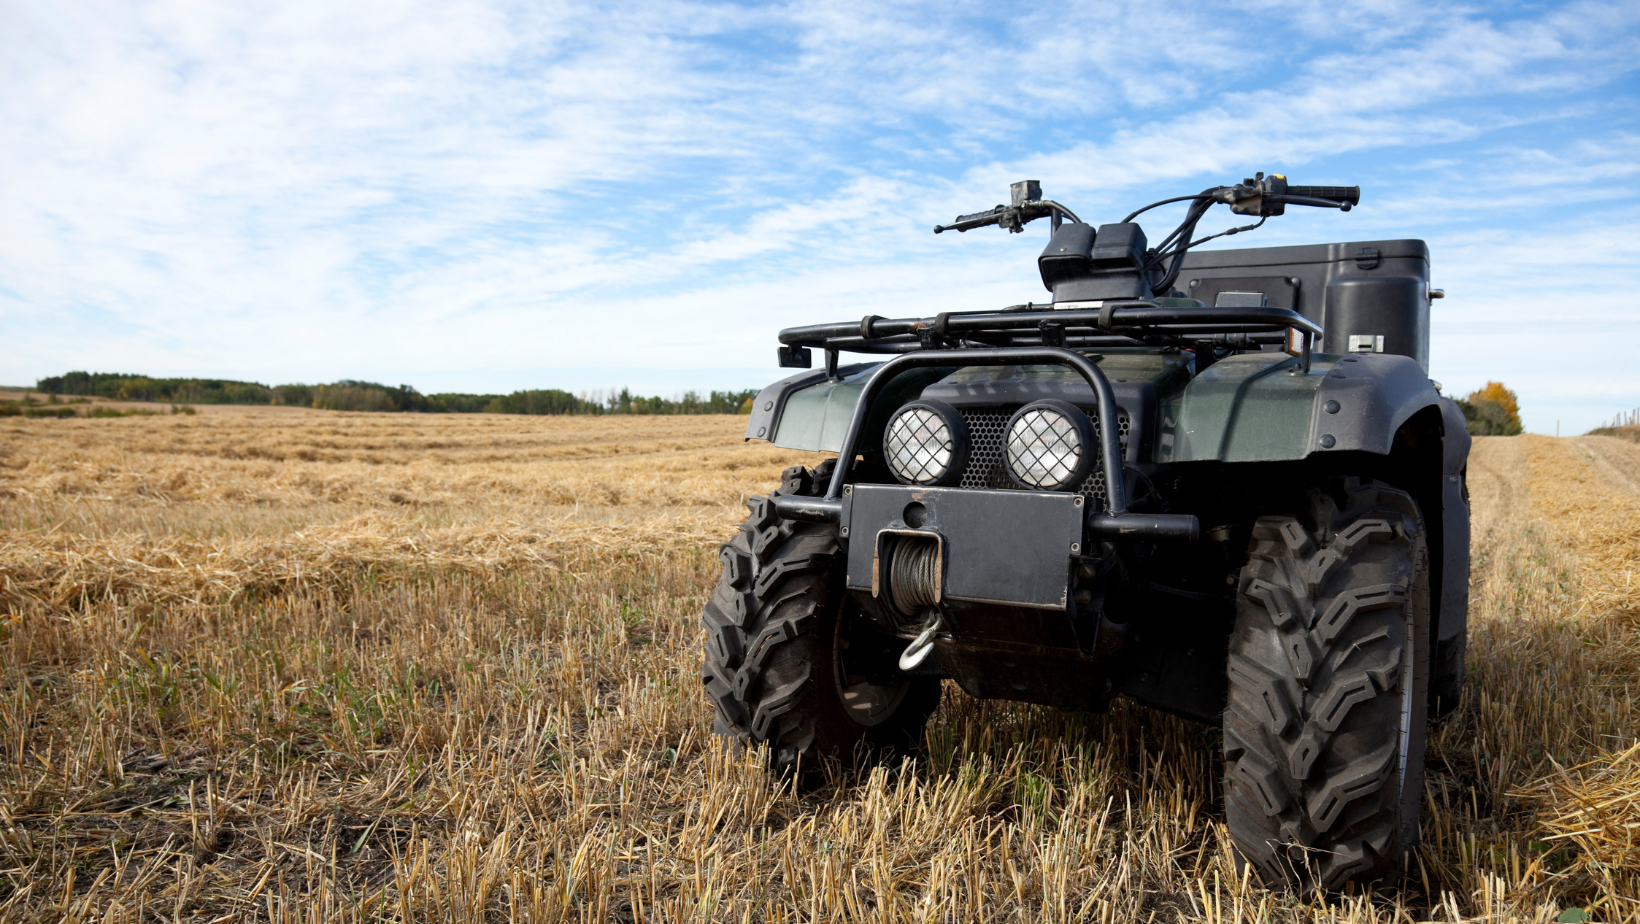 What You Need to Know About ATV/UTV Insurance